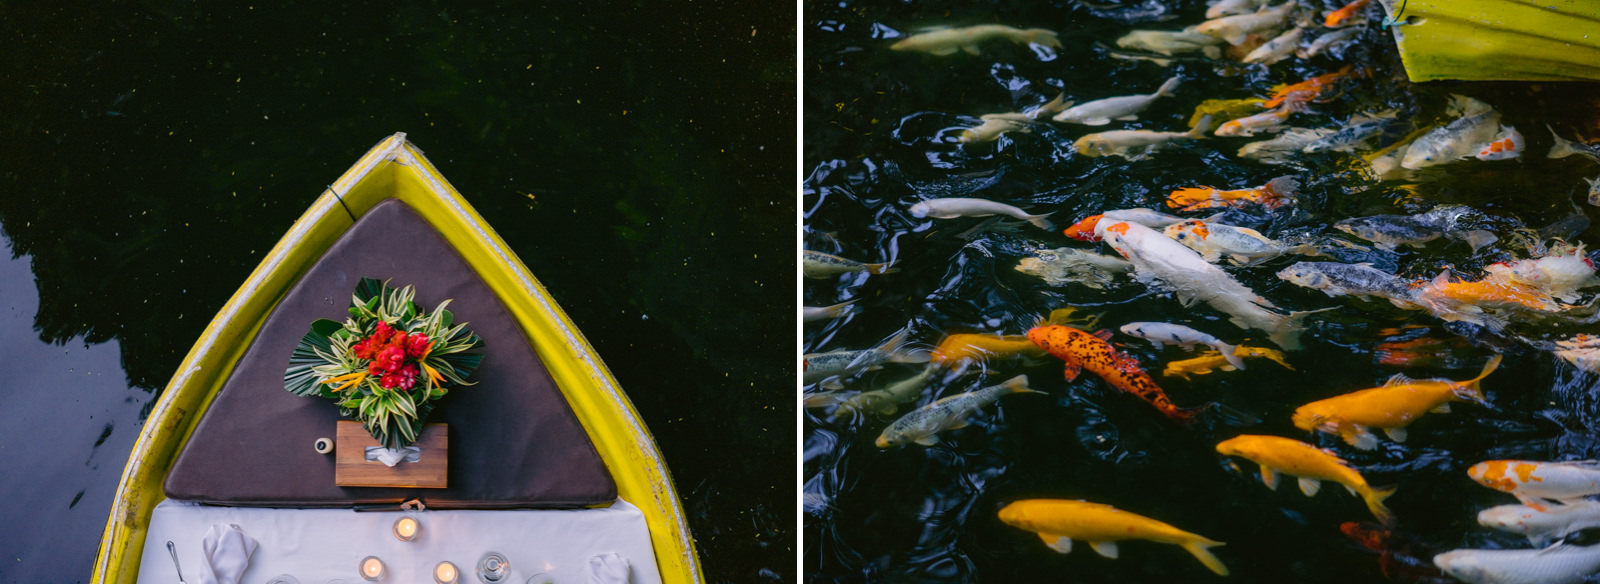 The boat and the Koi fish